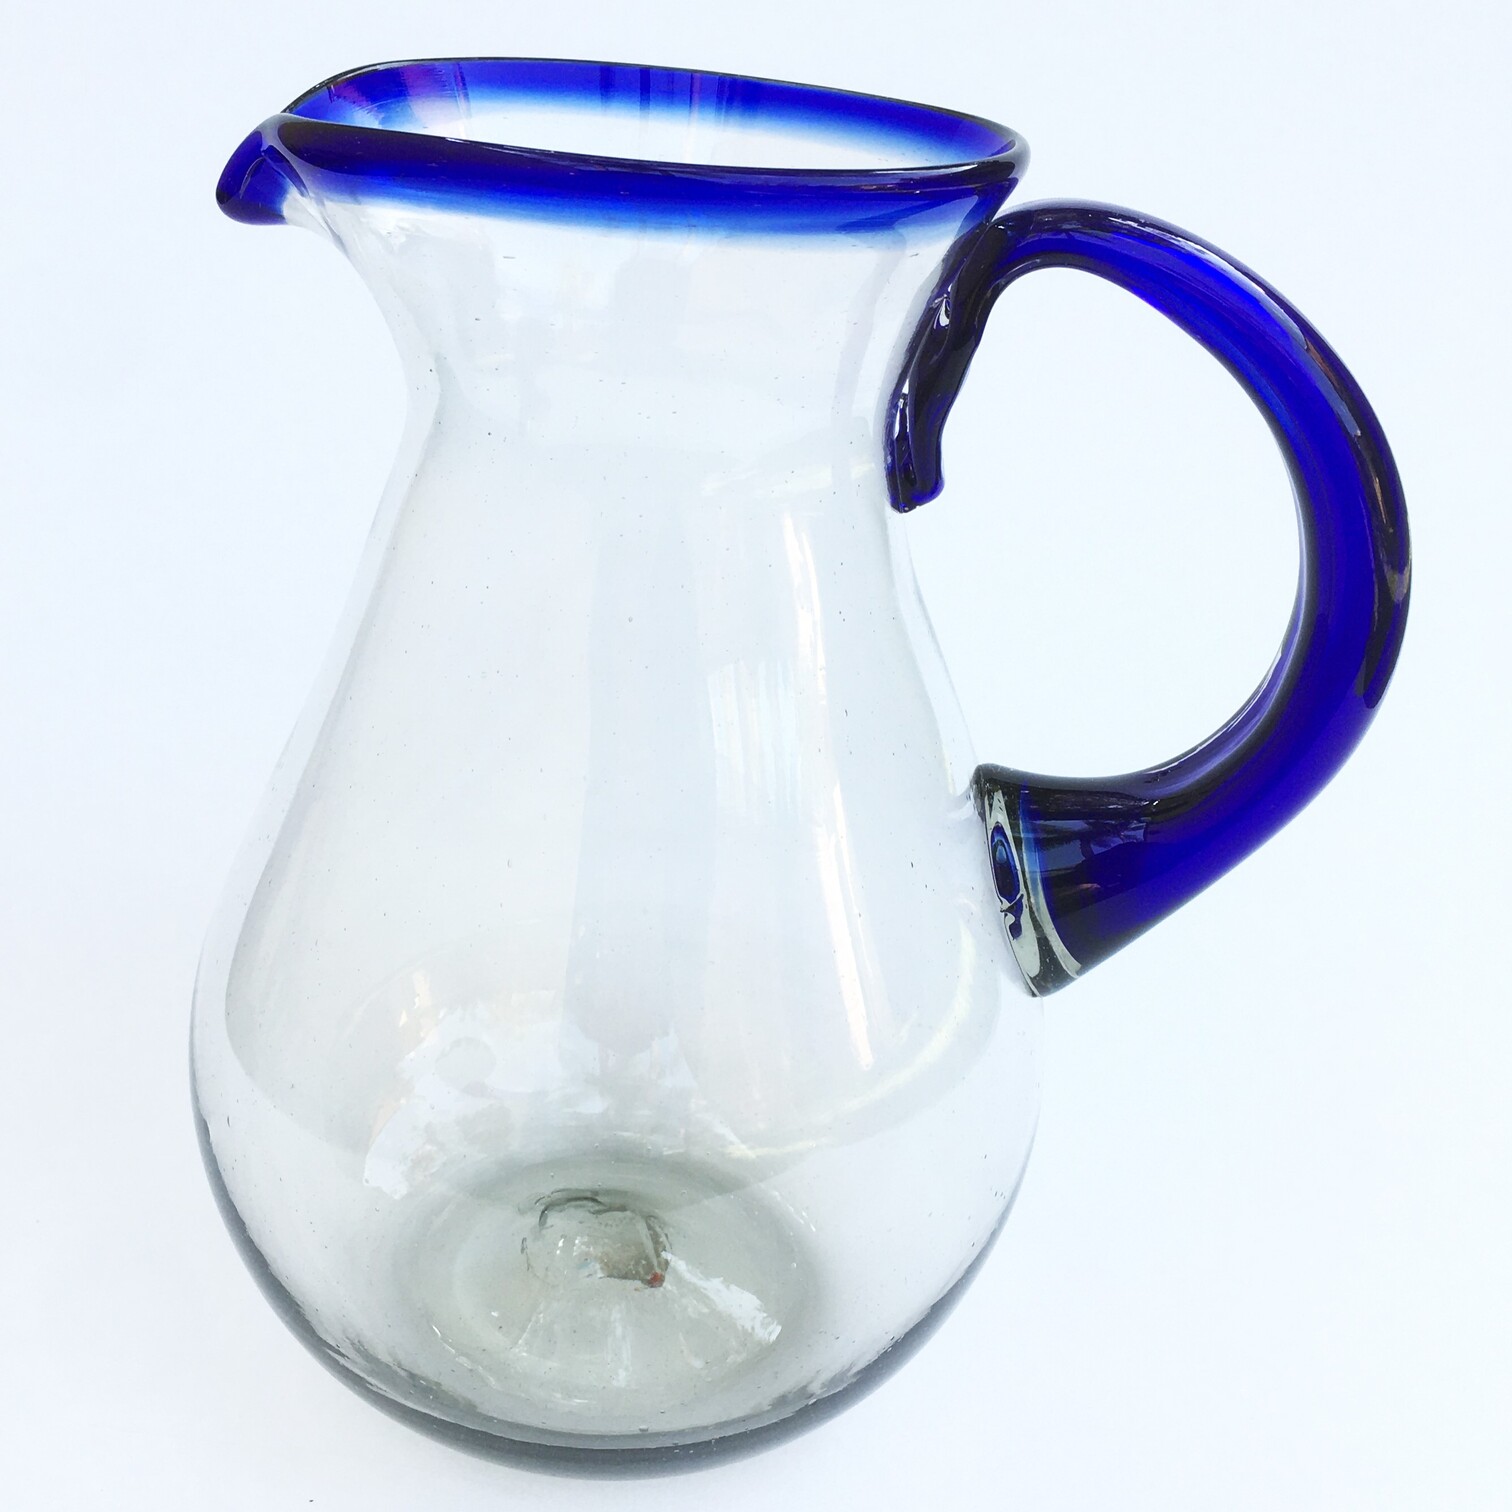 Colored Rim Glassware / Cobalt Blue Rim 84 oz Tall Pear Pitcher / This classic pitcher is perfect for pouring out all kinds of refreshing drinks.